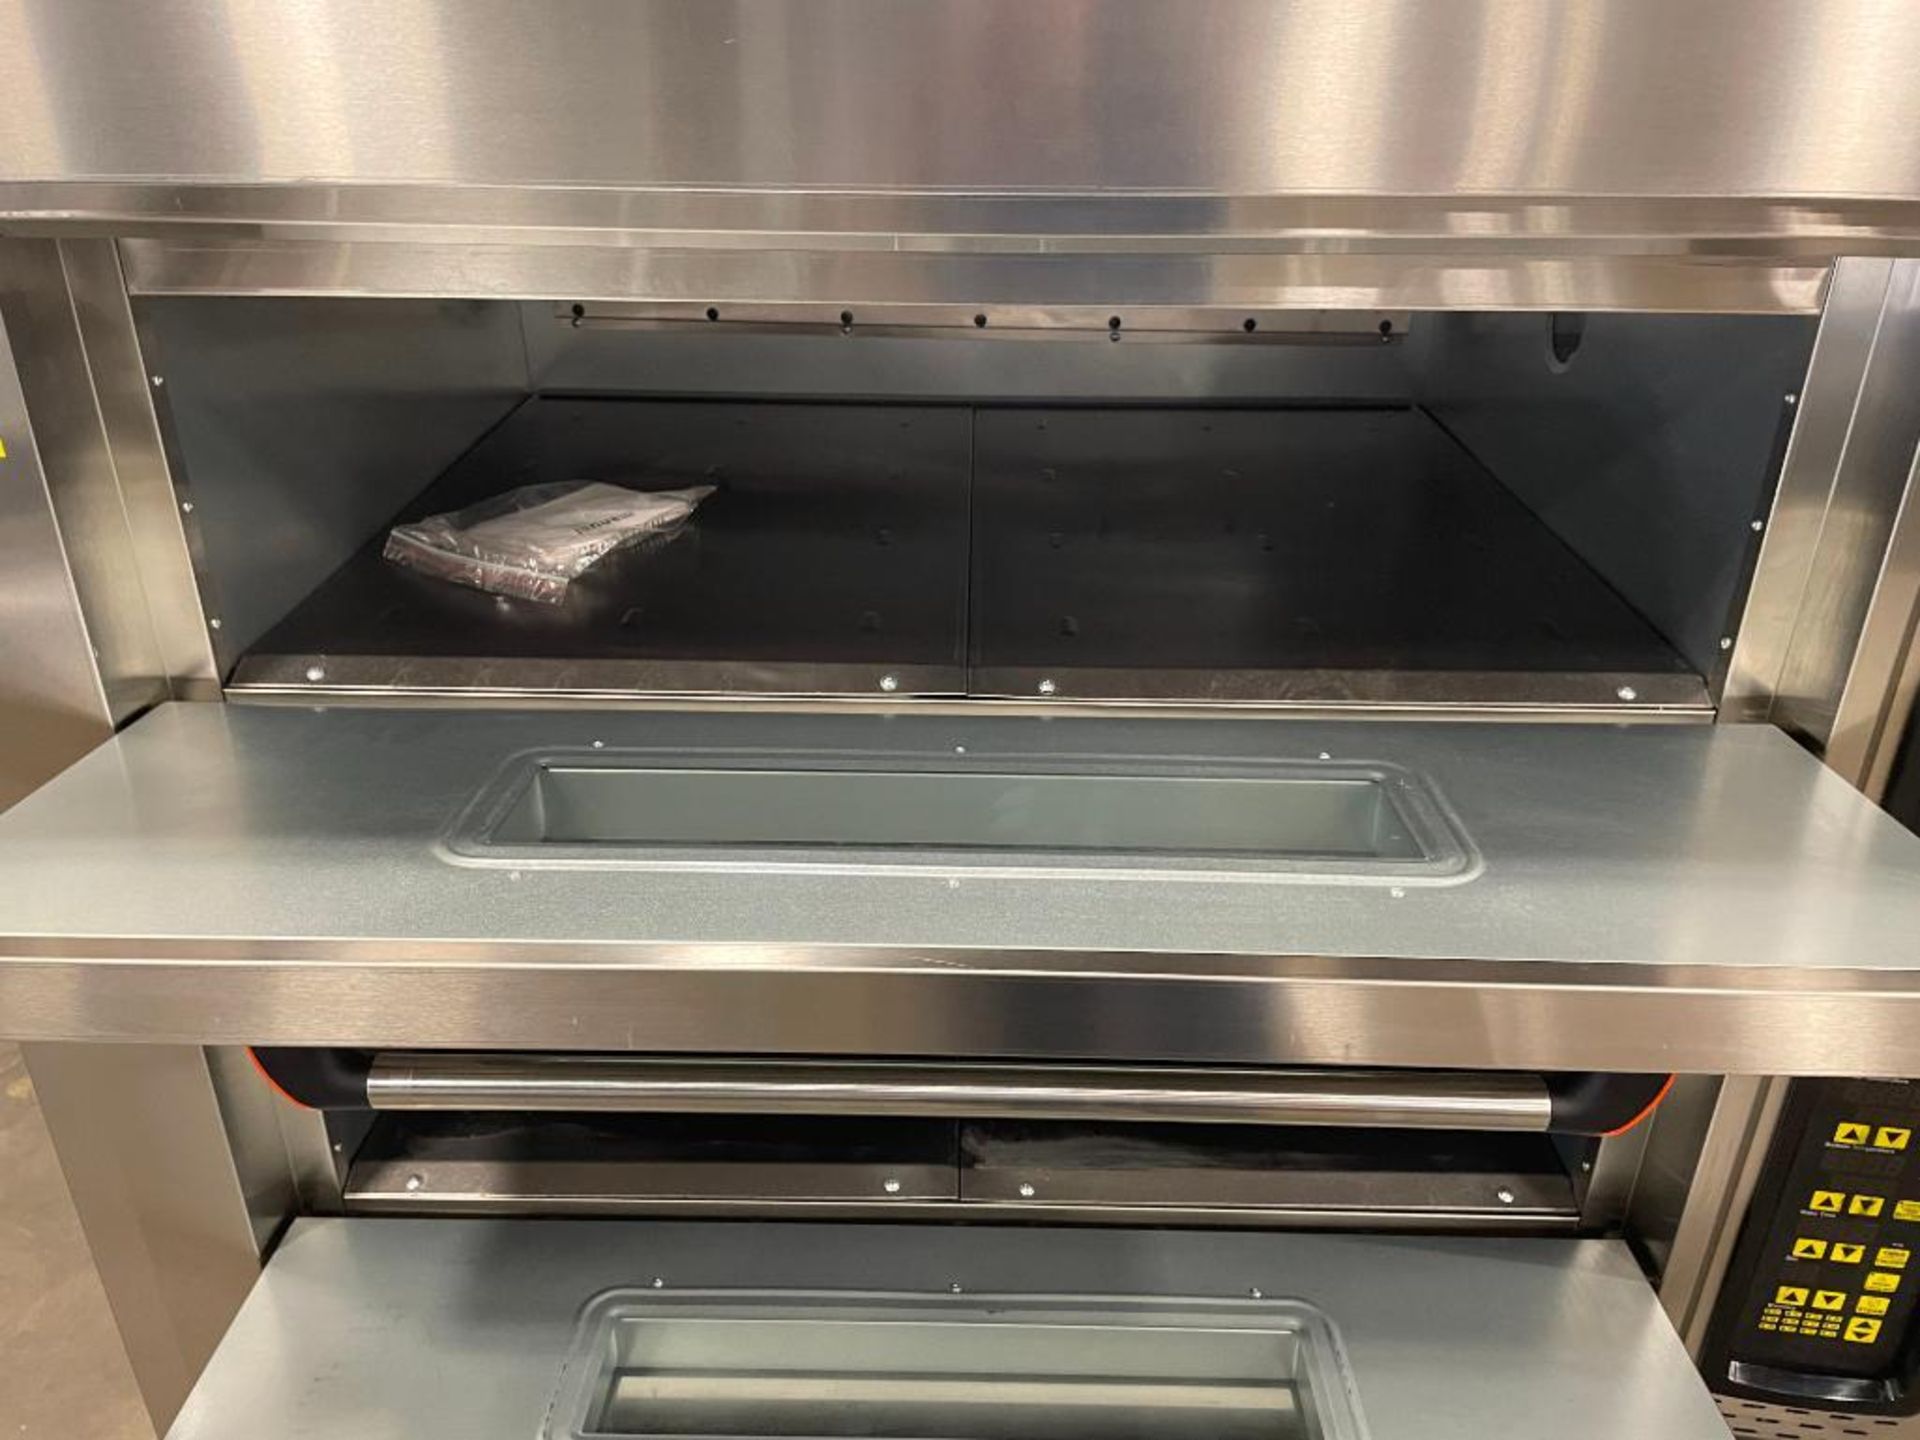 NEW HGB-306 TRIPLE DECK ELECTRIC OVEN - Image 3 of 13